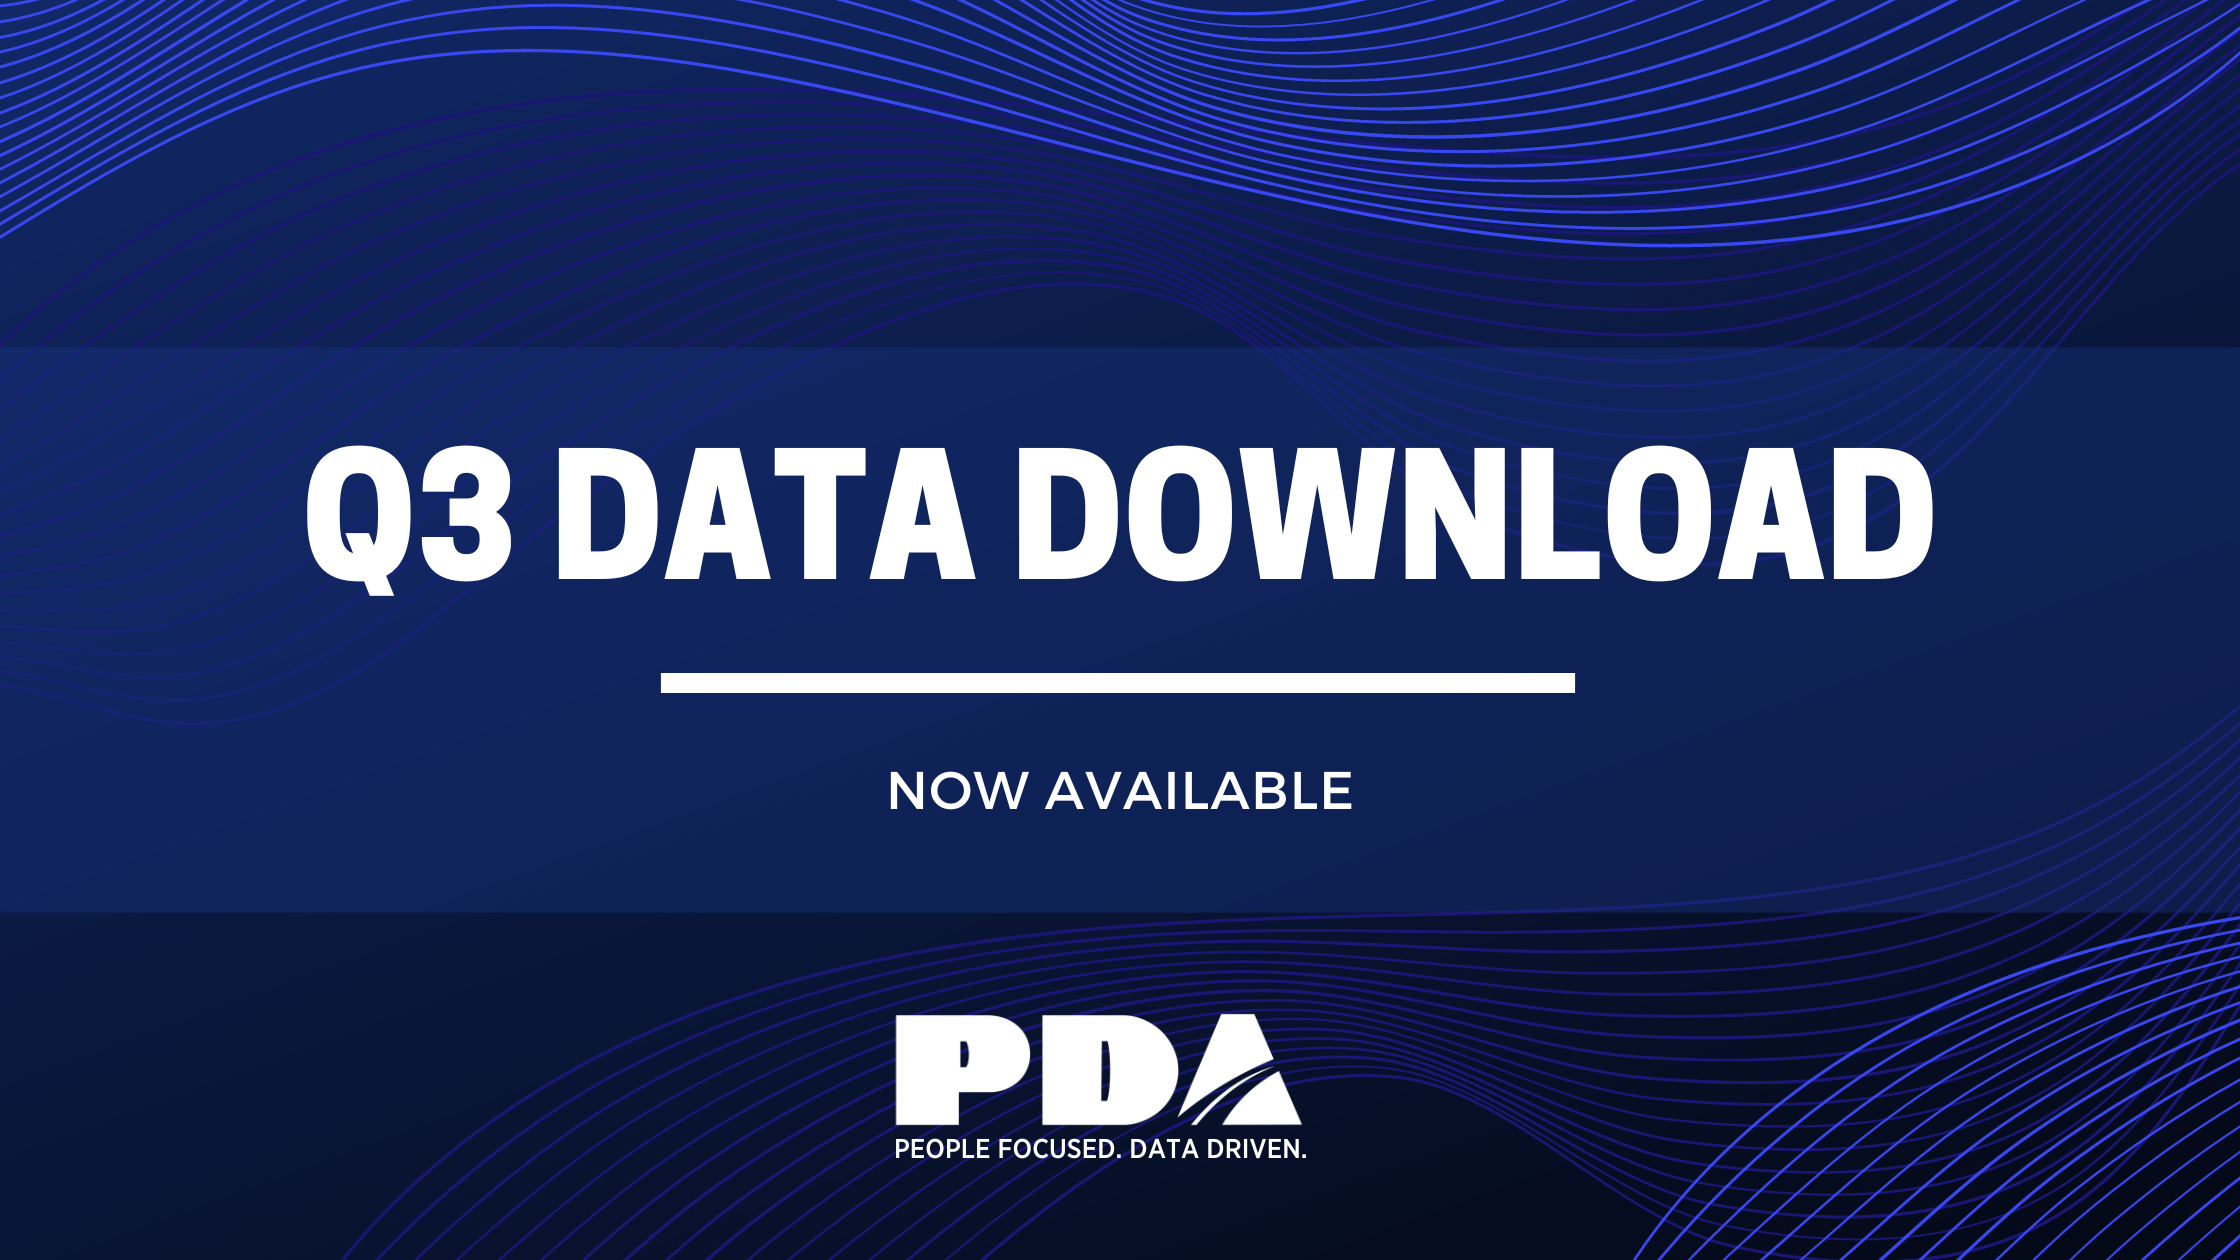 Message Reading: Q3 Data Download form PDA.